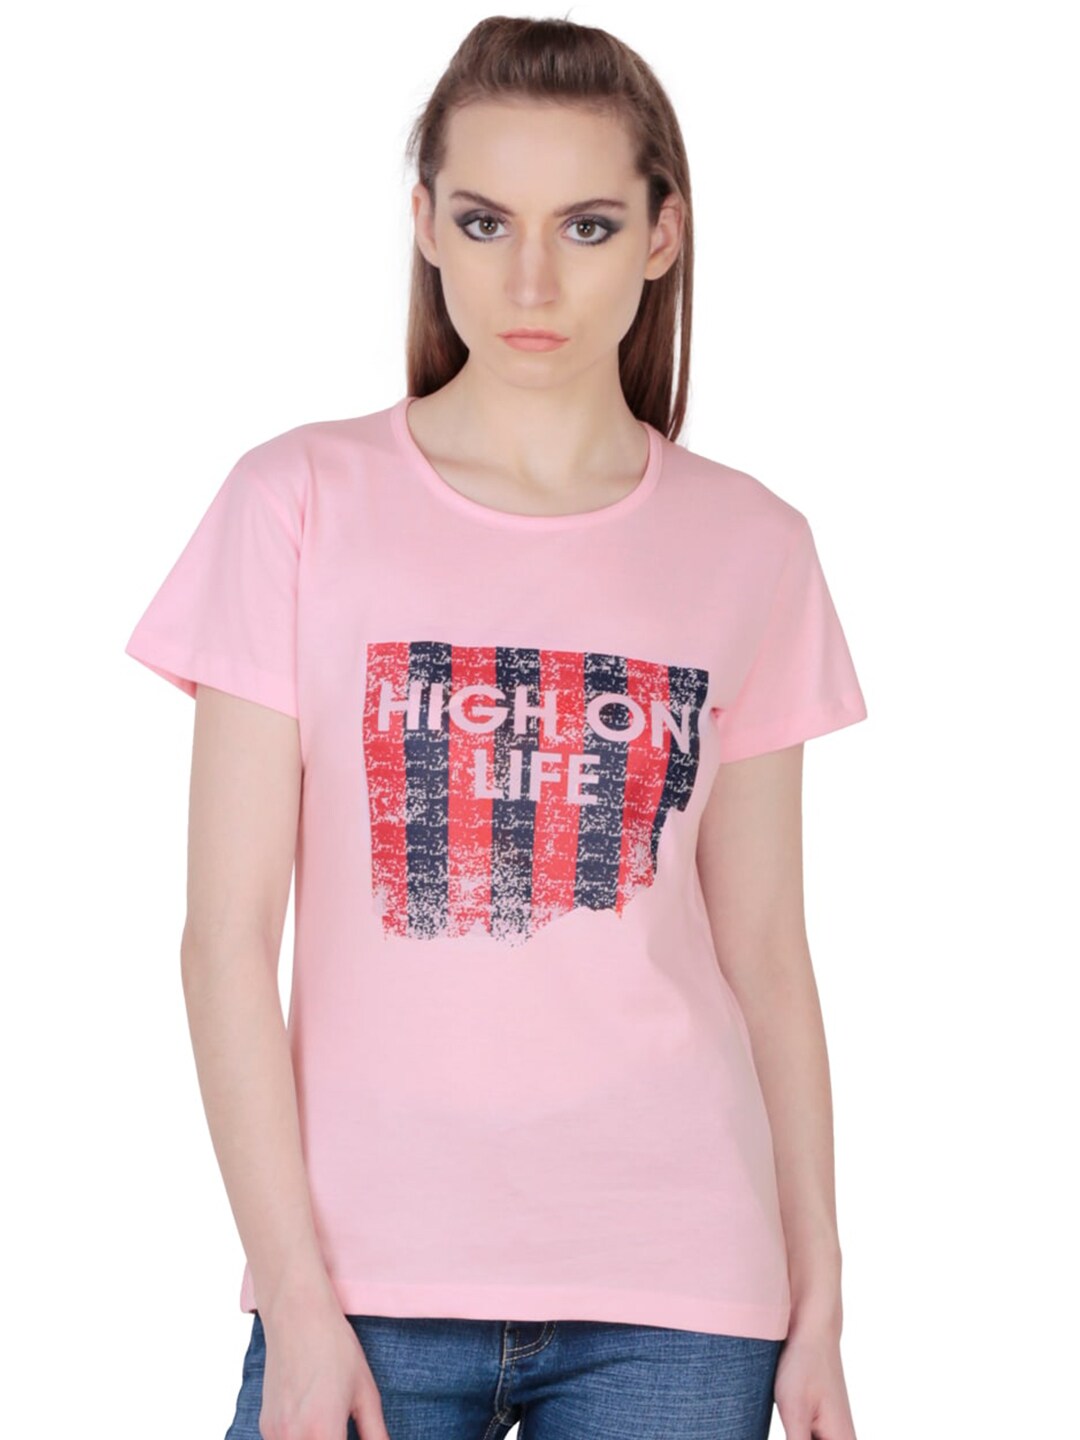 Fashionable Typography Printed Cotton T-Shirts Price in India